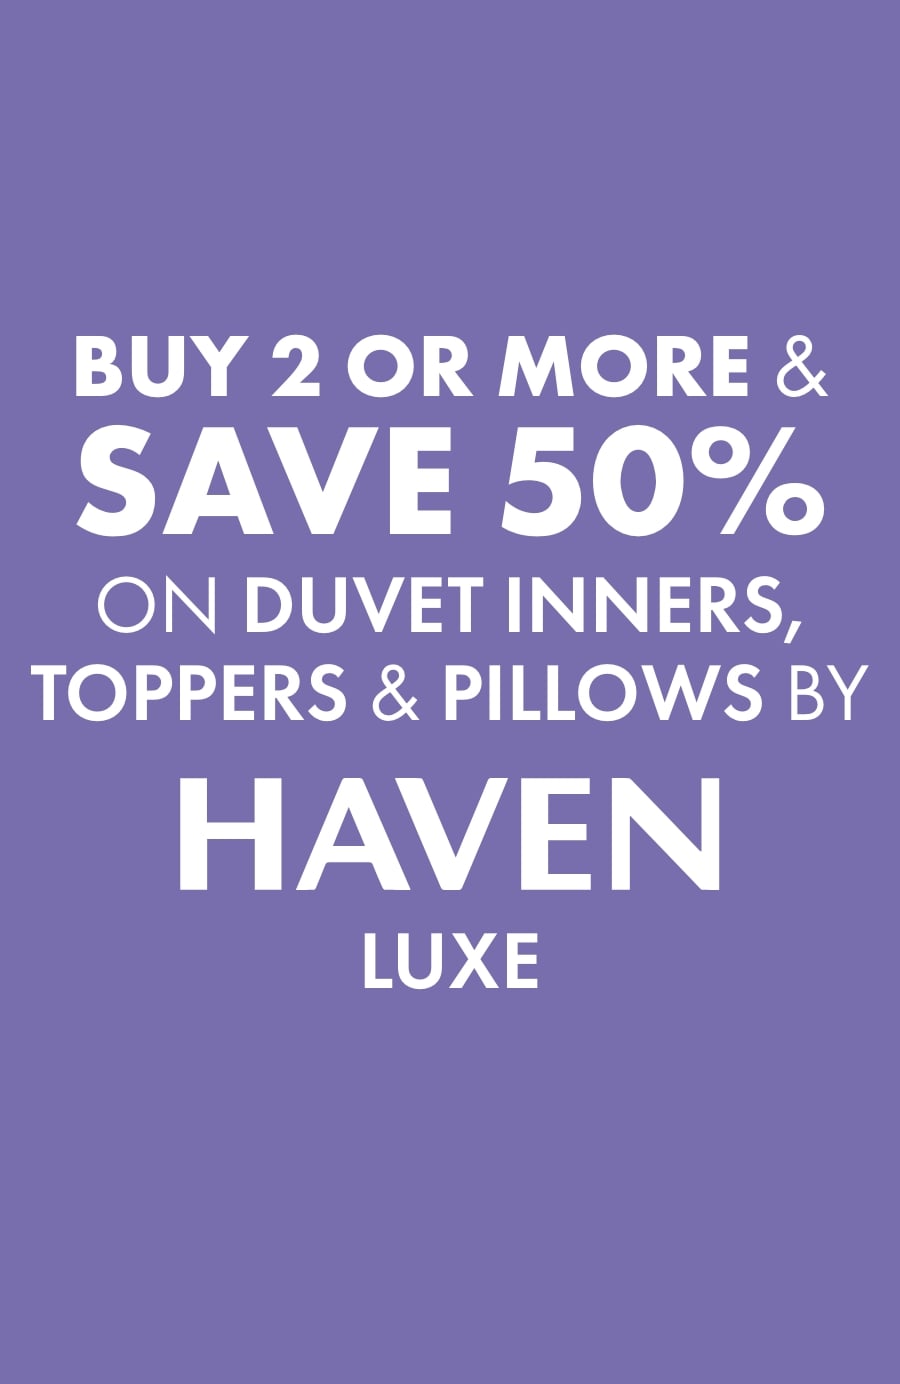 Buy 2 or more & Save 50% on Duvet Inners, Toppers & Pillows by Haven Luxe